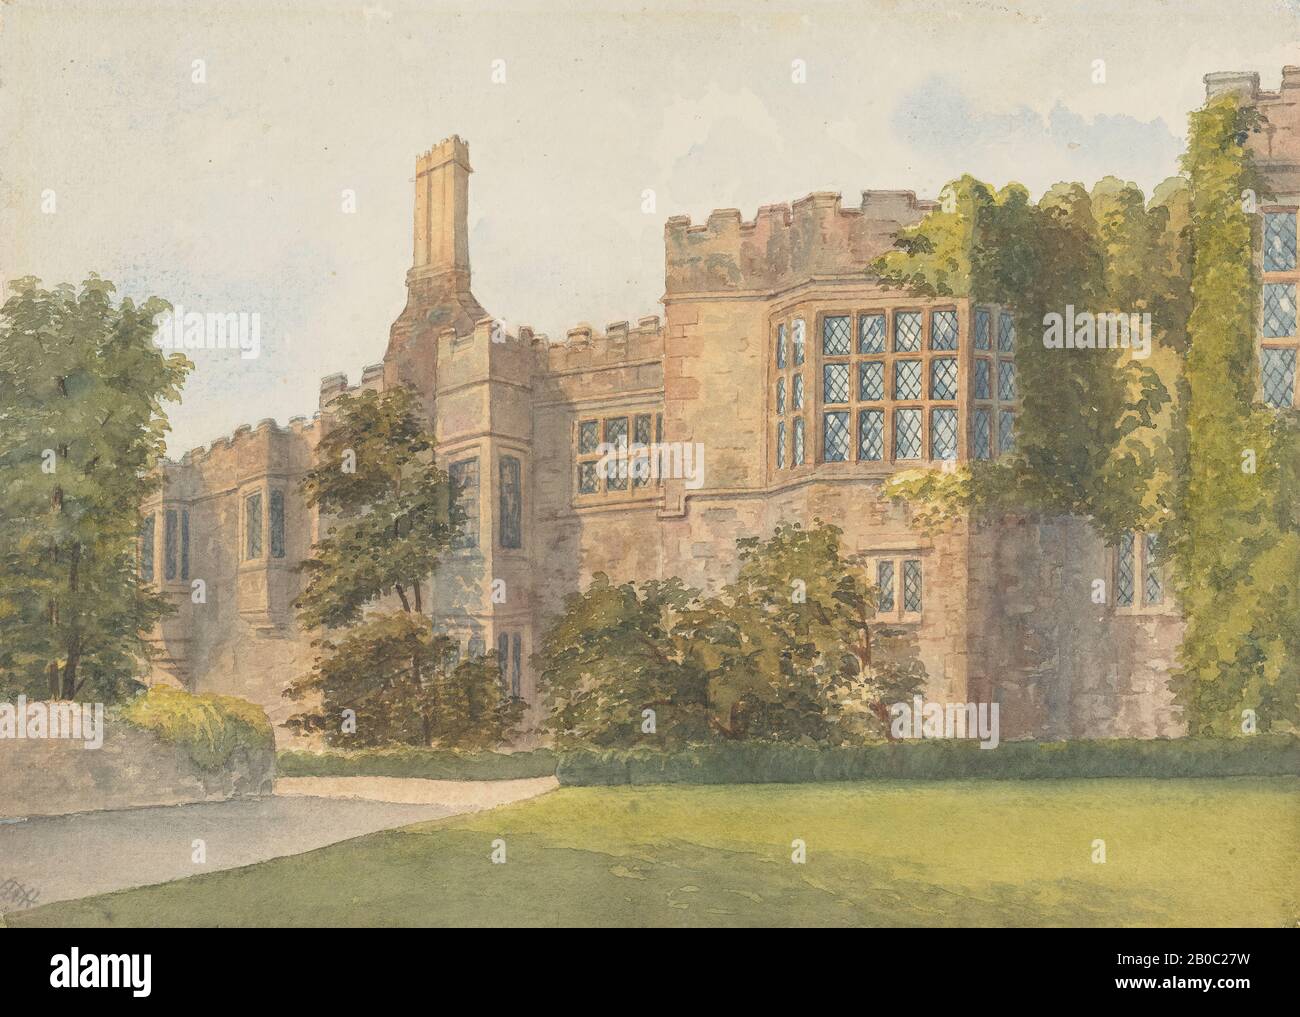 A.H., Tudor Manor House, 1800-1900, watercolor, graphite on paper, 10 1/16 in. x 13 7/8 in. (25.5 cm. x 35.2 cm.) Stock Photo